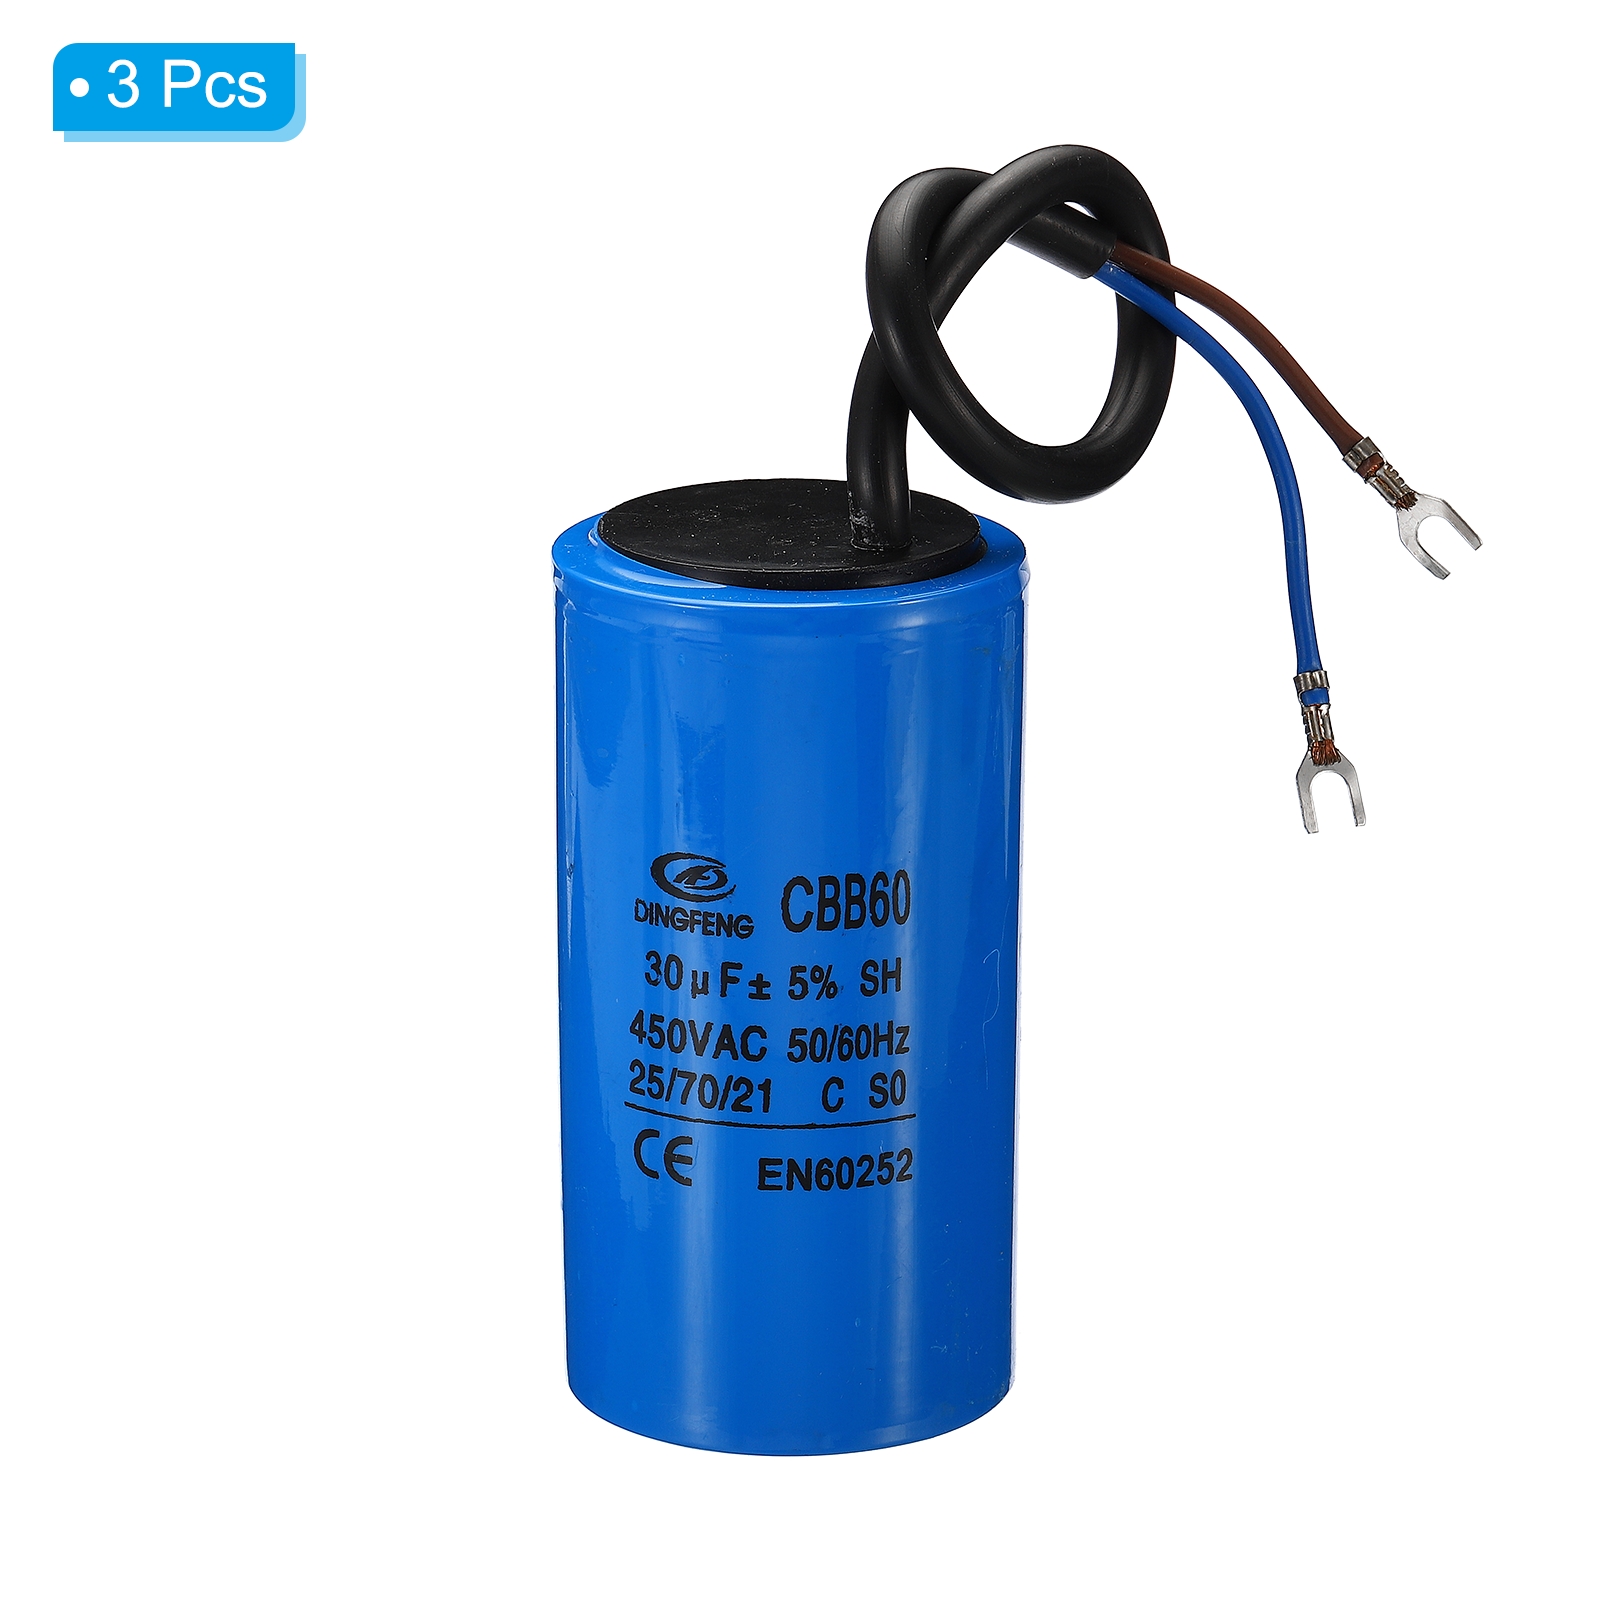 CBB60 30uF Running Capacitor, 3pcs AC 450V 2 Wires 50/60Hz Cylinder 90x50mm for Motor Start - image 3 of 5